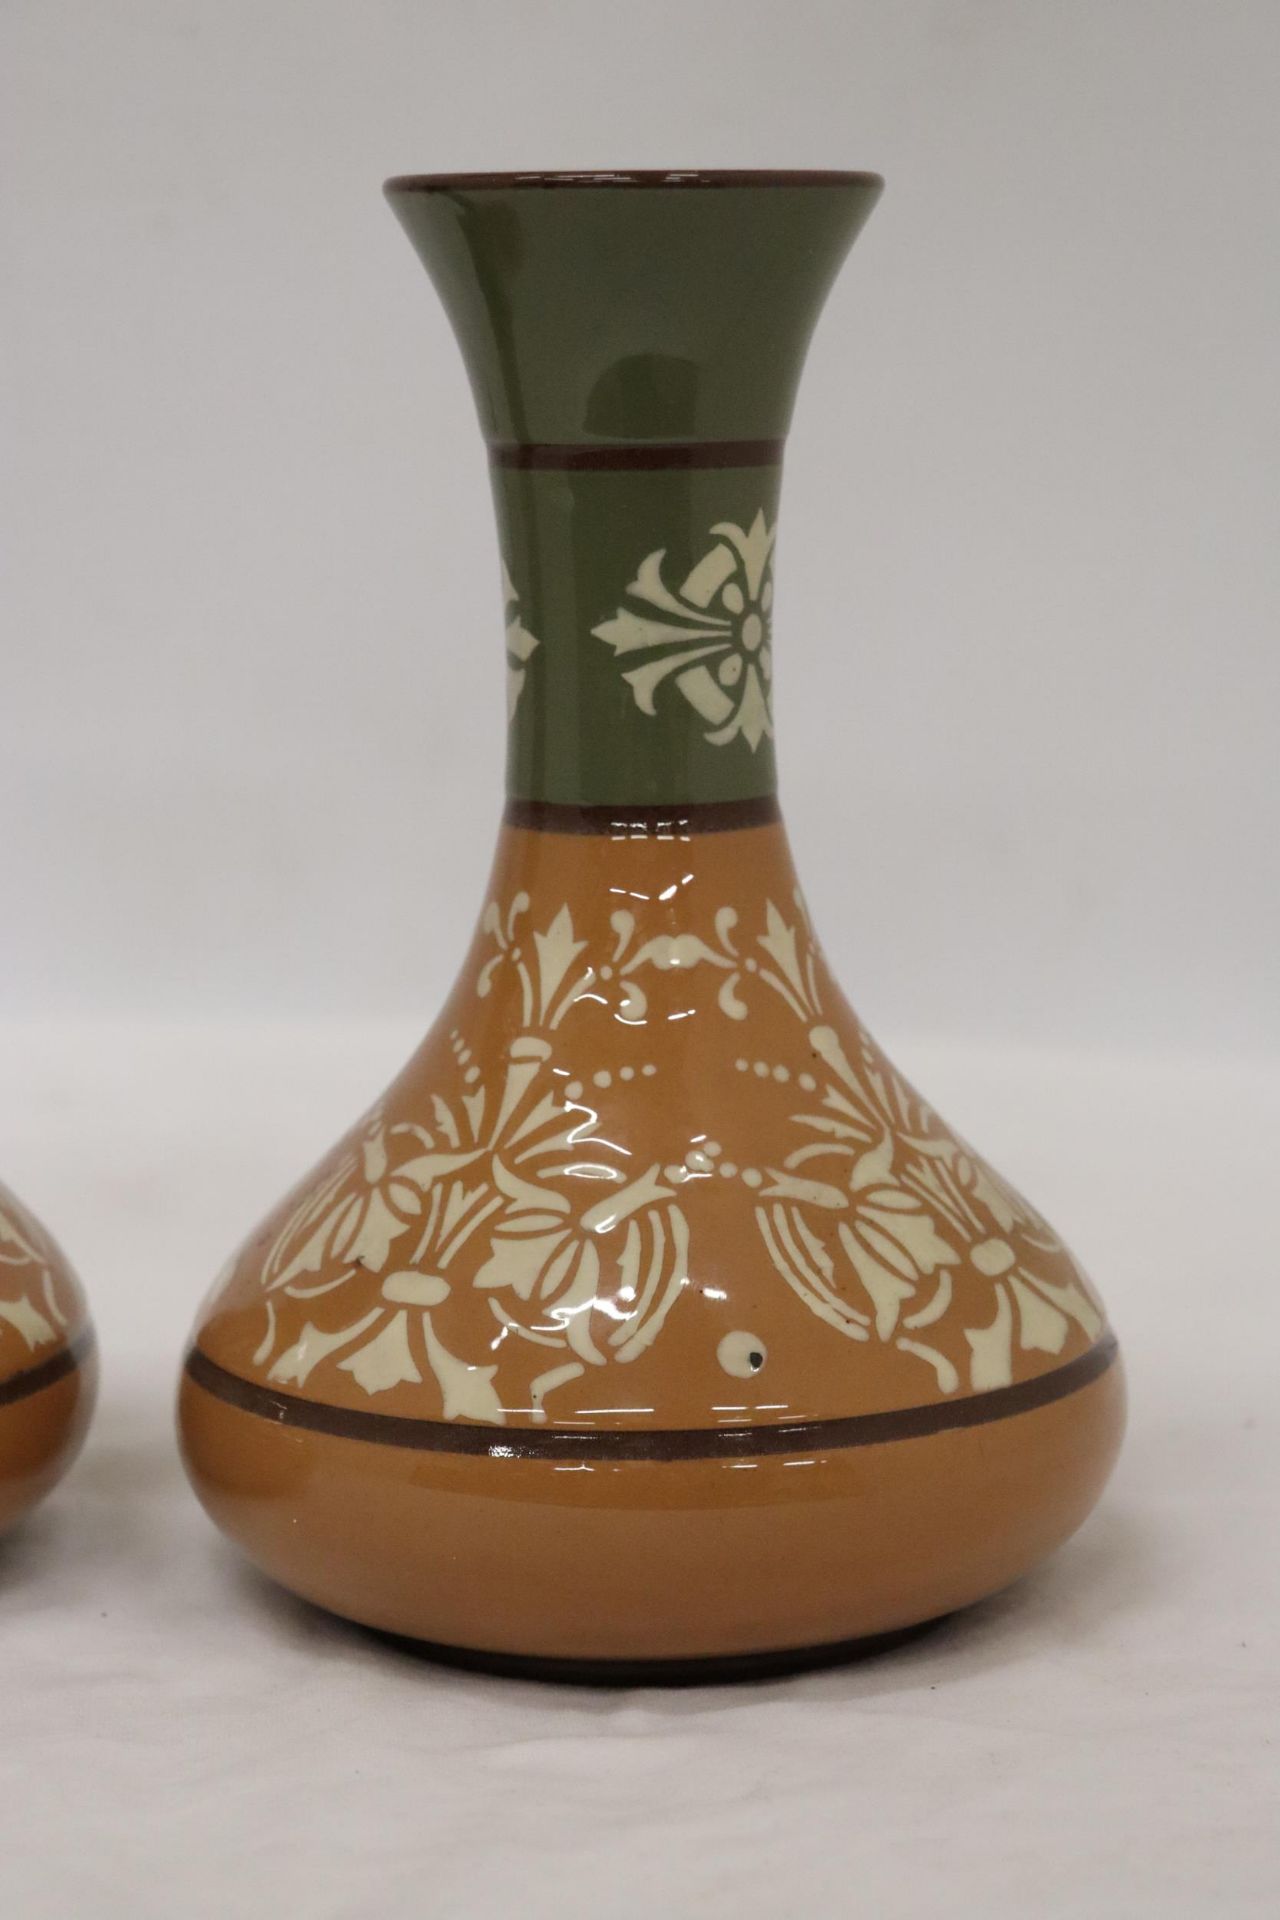 A PAIR OF LANGLEY LOVIQUE WARE ART POTTERY VASES - Image 2 of 4